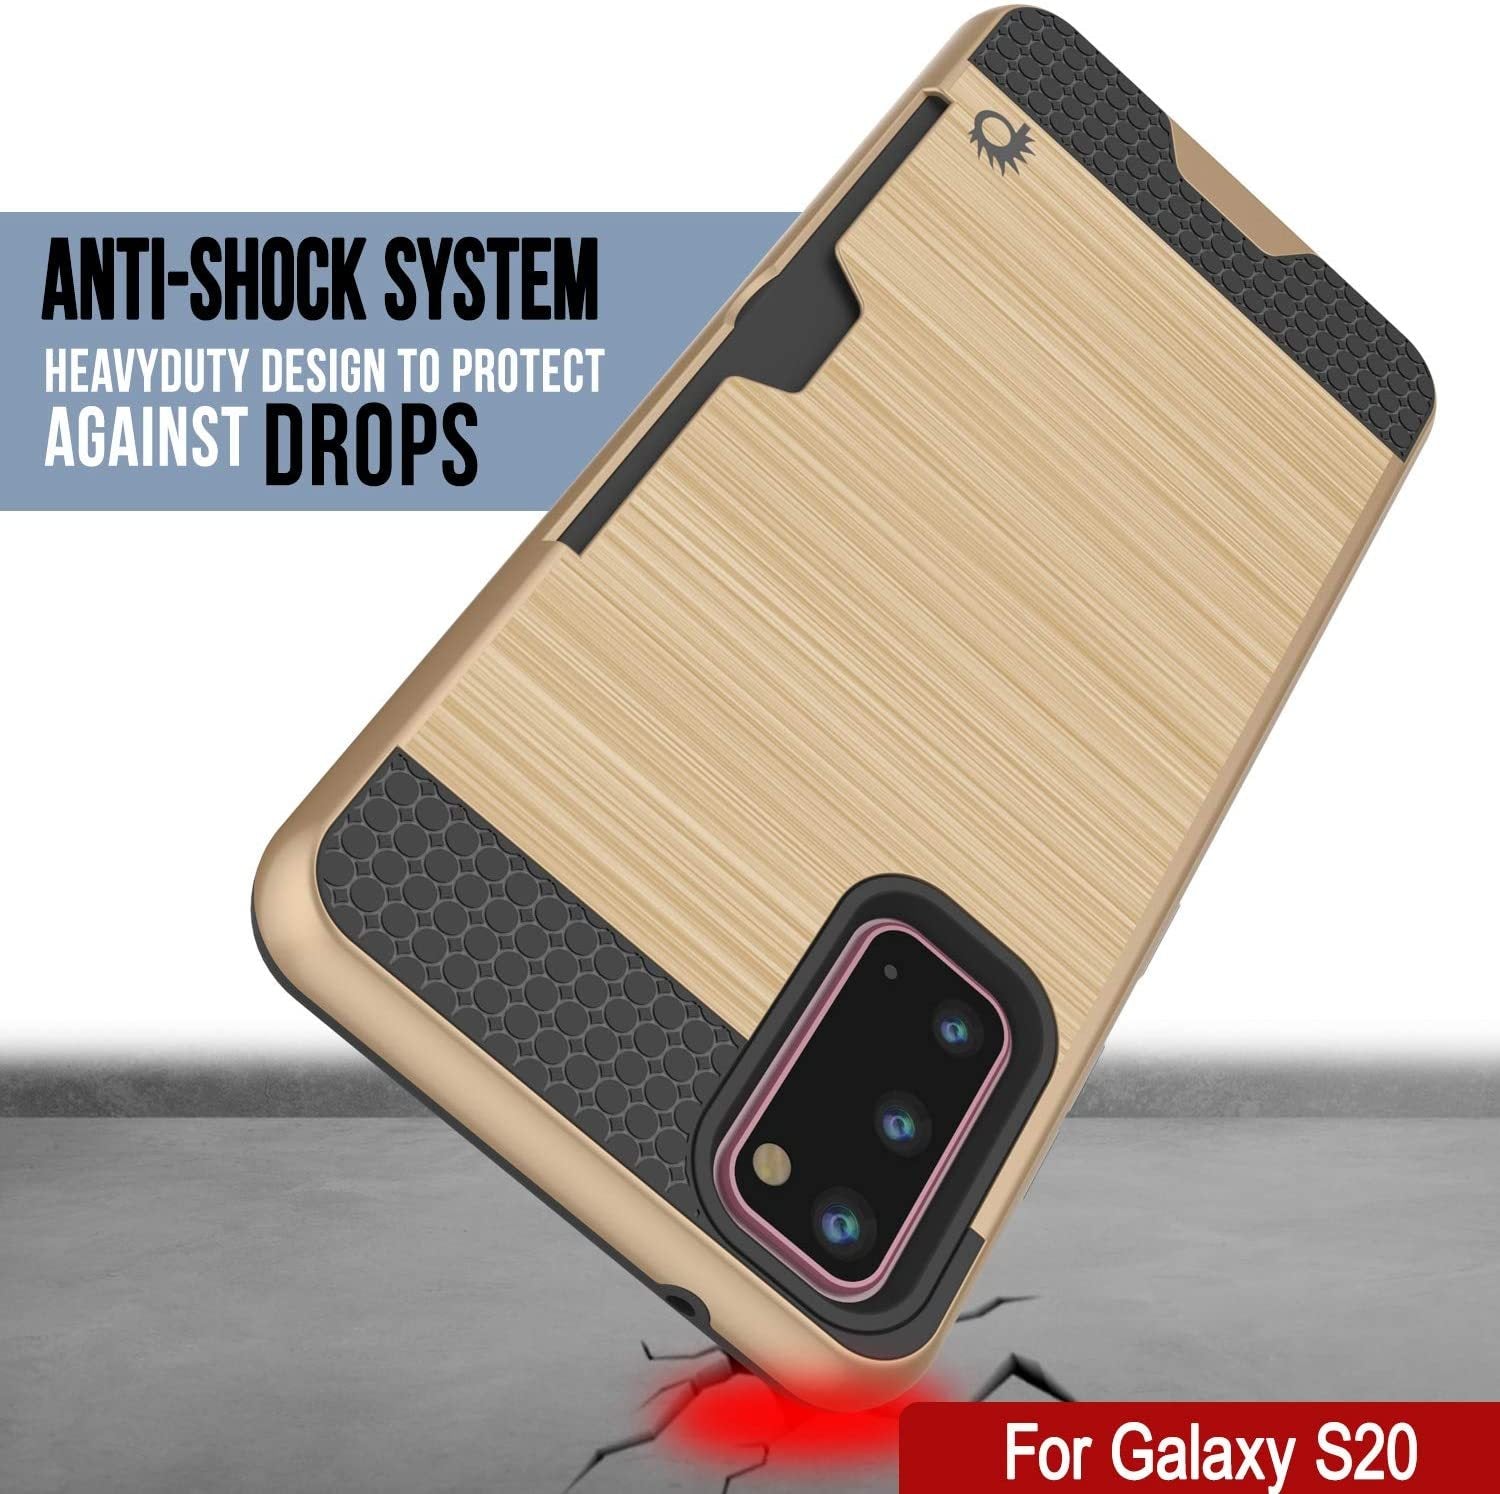 Galaxy S20 Case, PUNKcase [SLOT Series] [Slim Fit] Dual-Layer Armor Cover w/Integrated Anti-Shock System, Credit Card Slot [Gold]